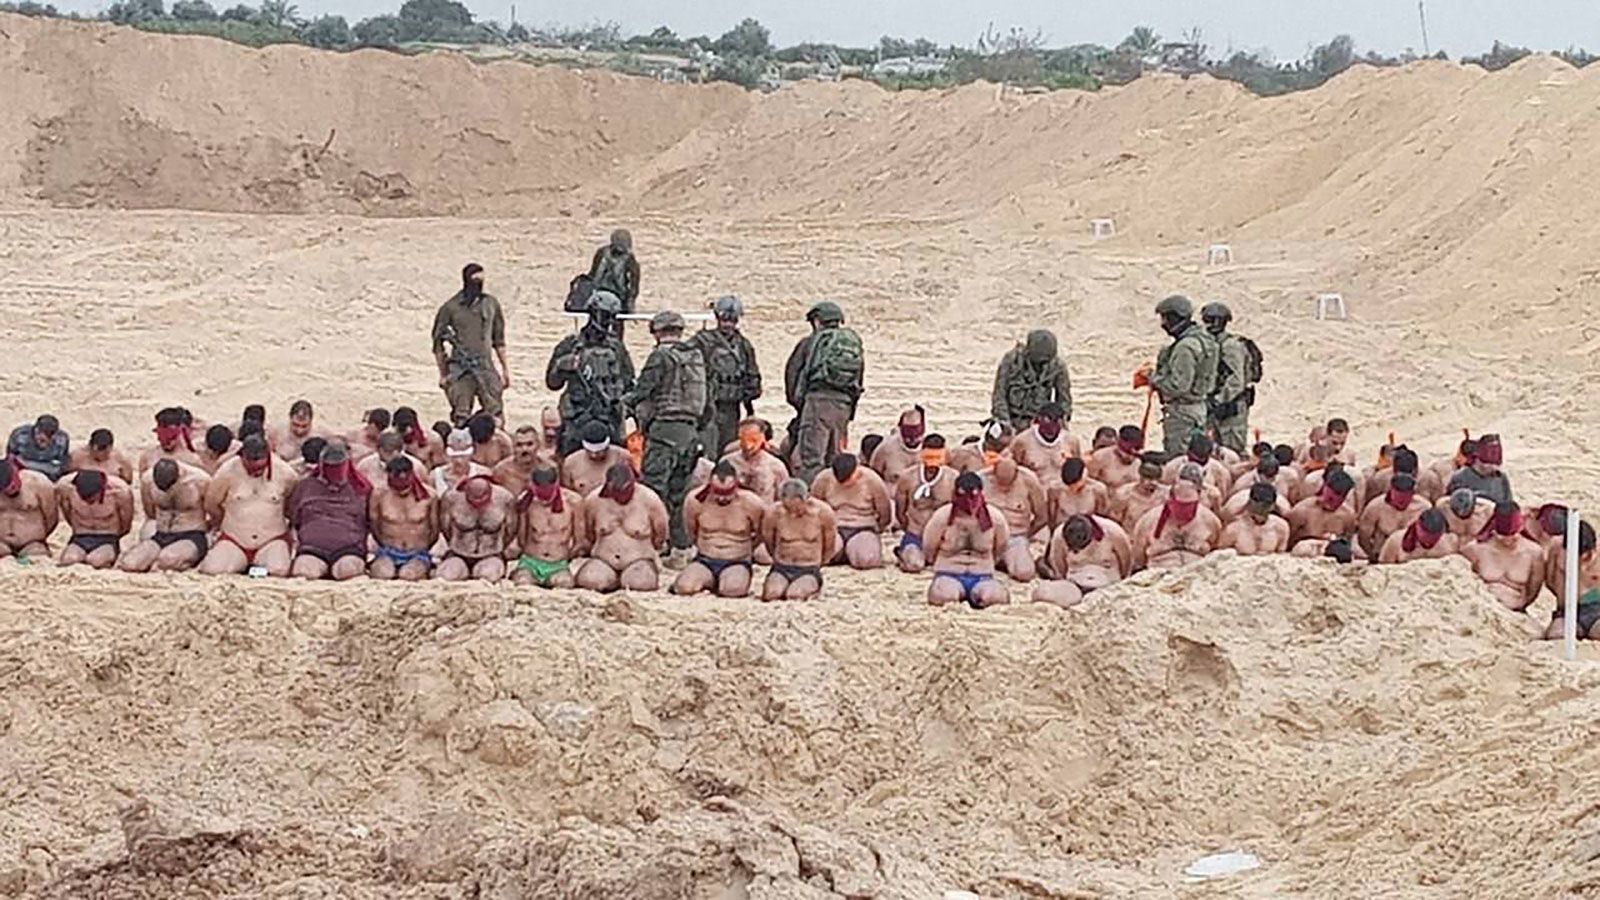 Images from Gaza circulating on social media showed a mass detention by the Israeli military of men who were made to strip to their underwear, kneel on the street, wear blindfolds and pack into the cargo bed of a military vehicle.